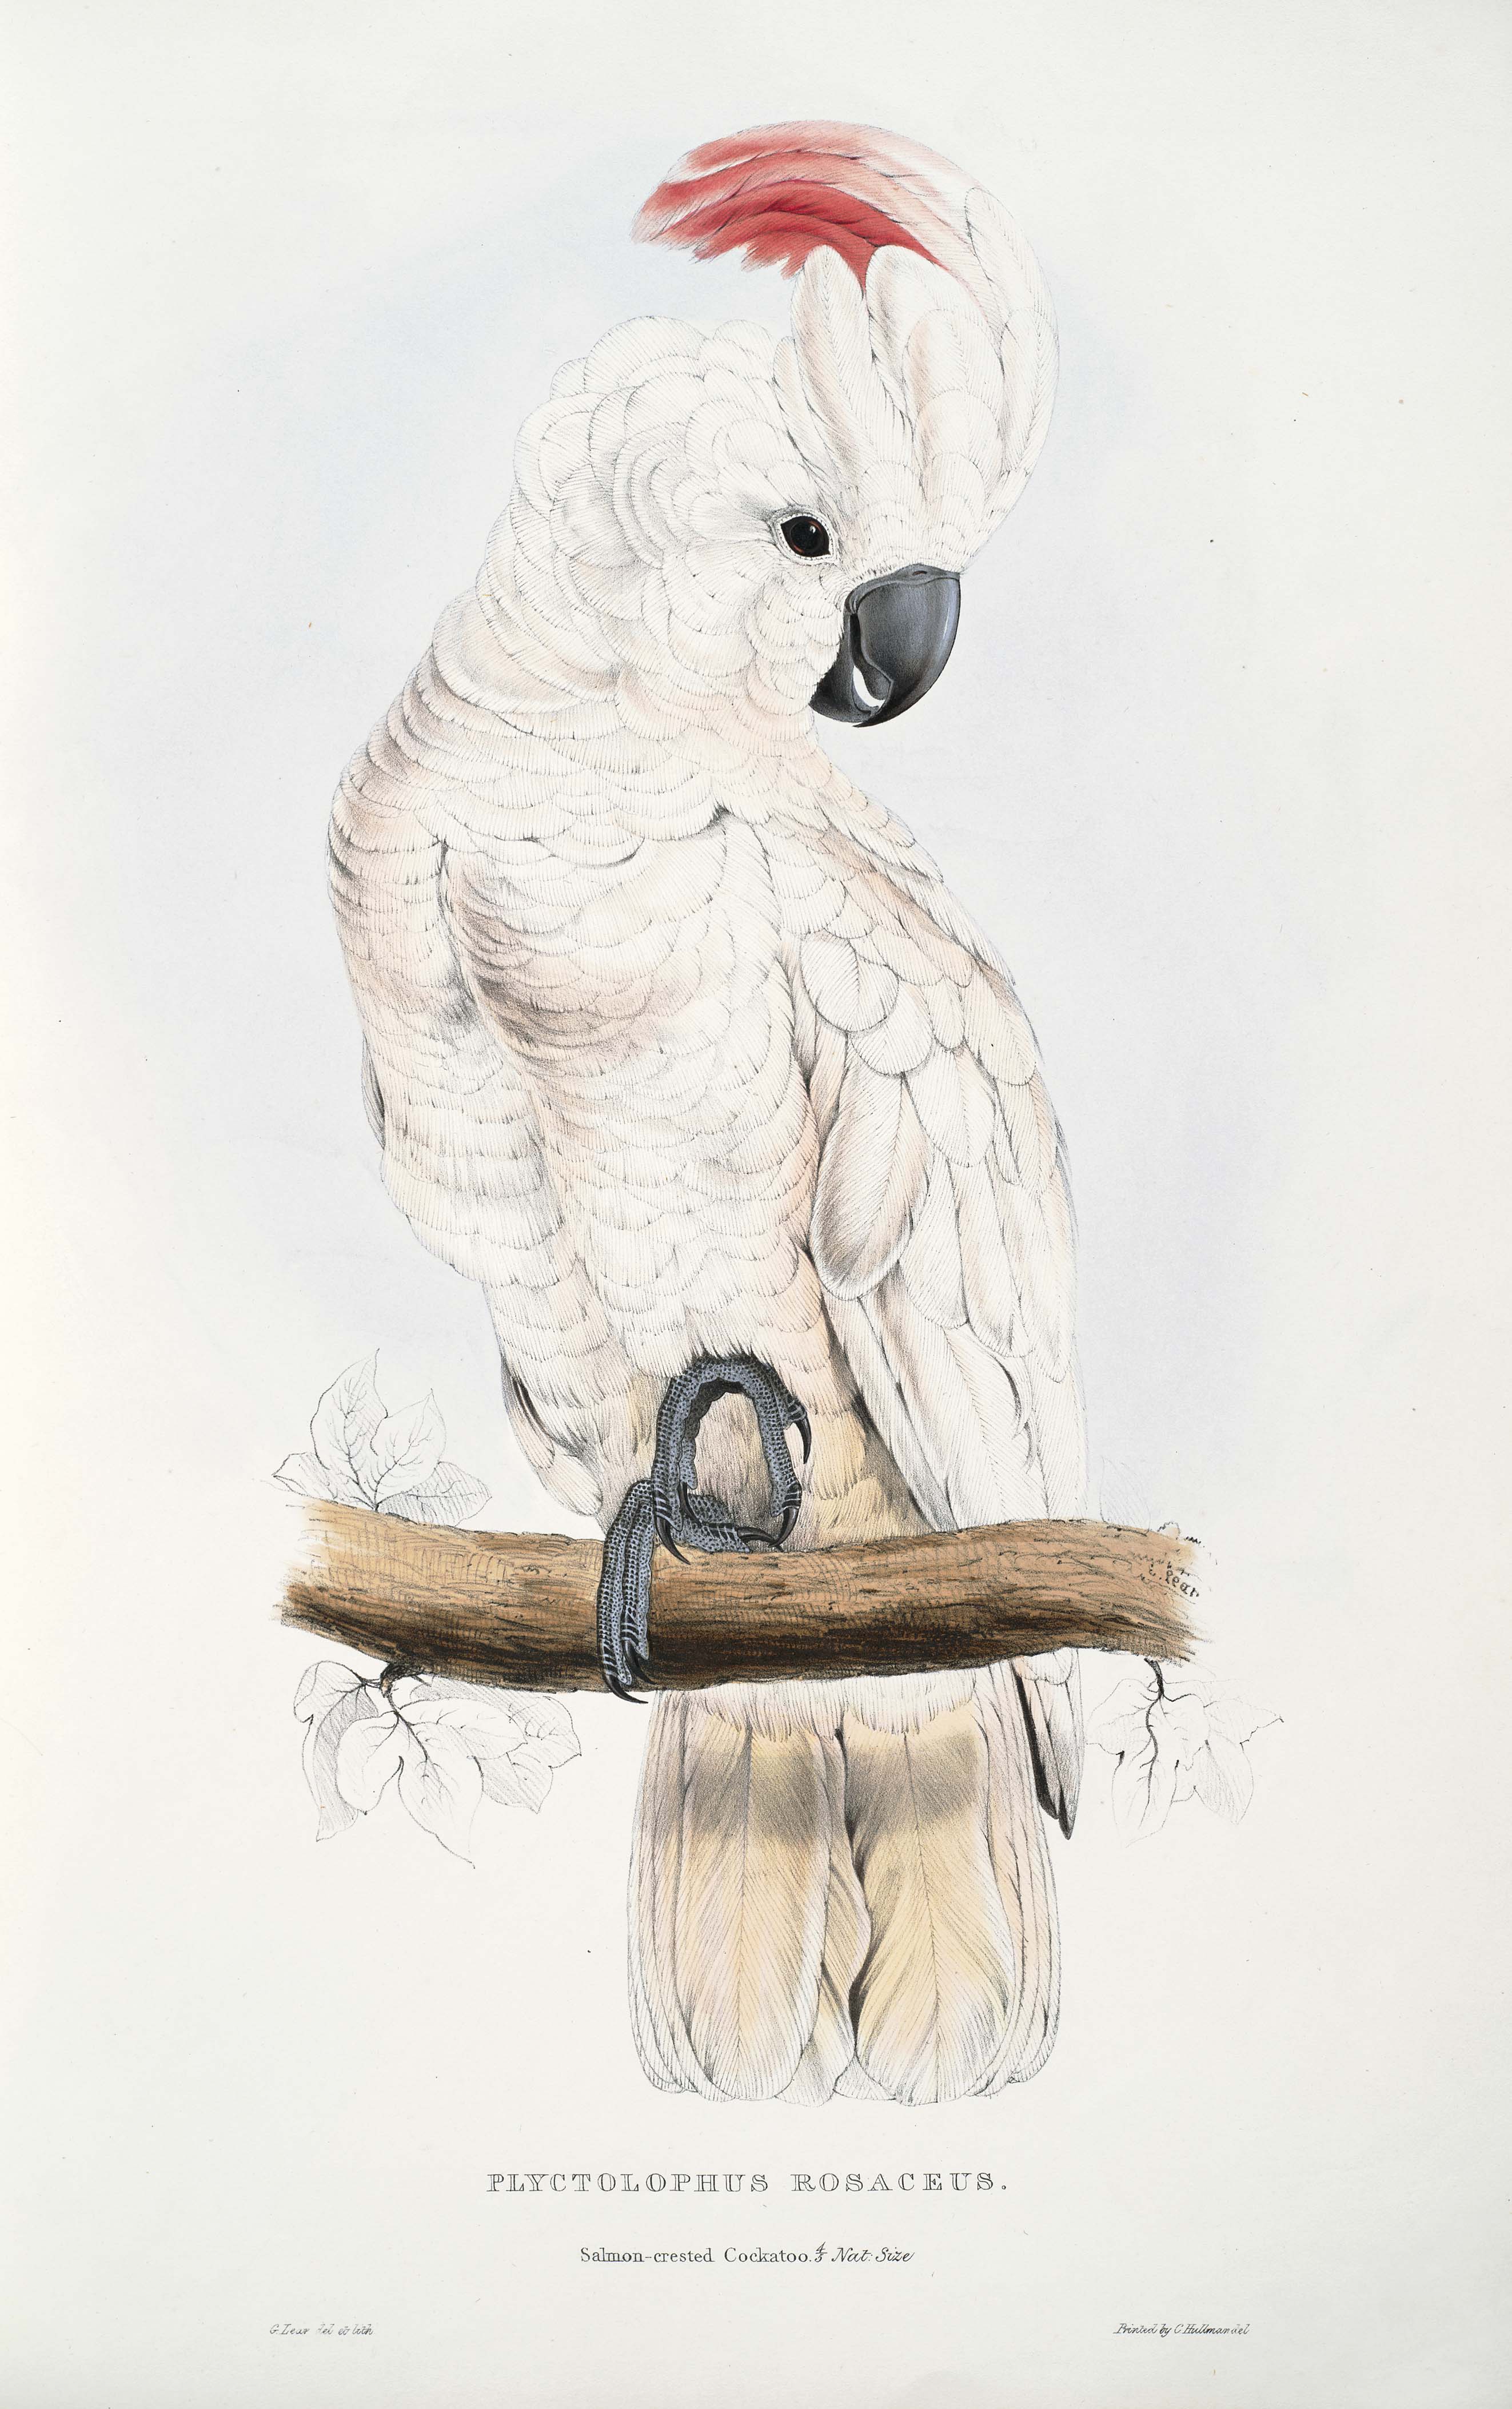 Cacatua moluccensis -Plyctolophus rosaceus Salmon-crested Cockatoo -by Edward Lear 1812-1888